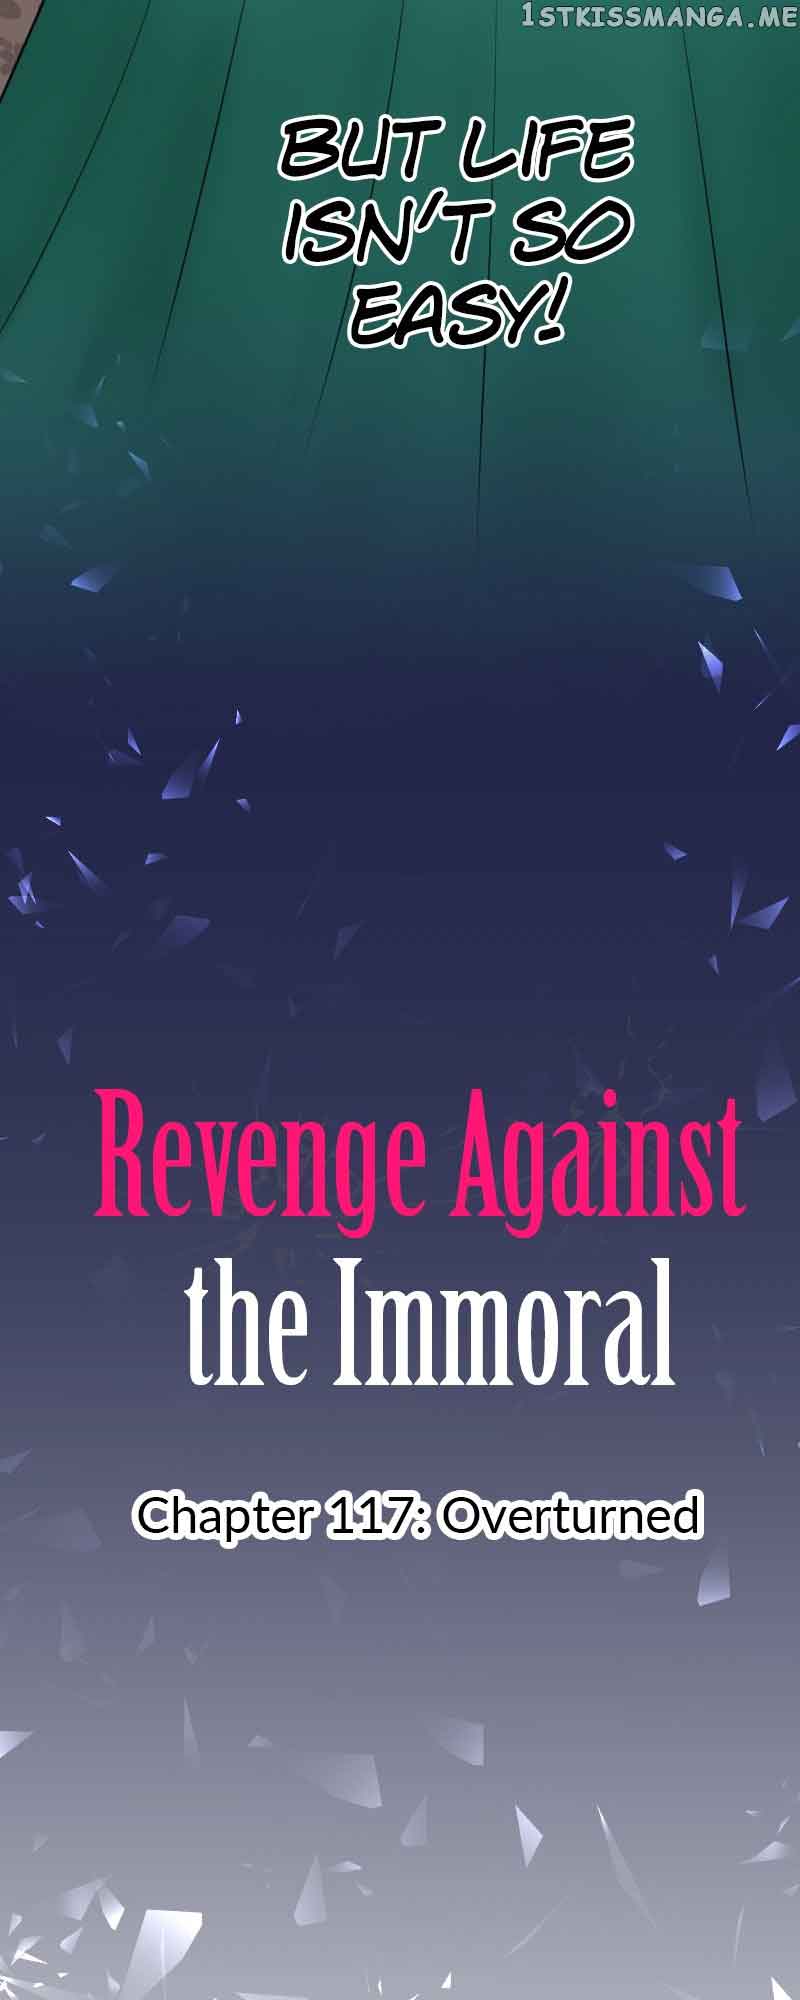 Revenge Against The Immoral - Page 4